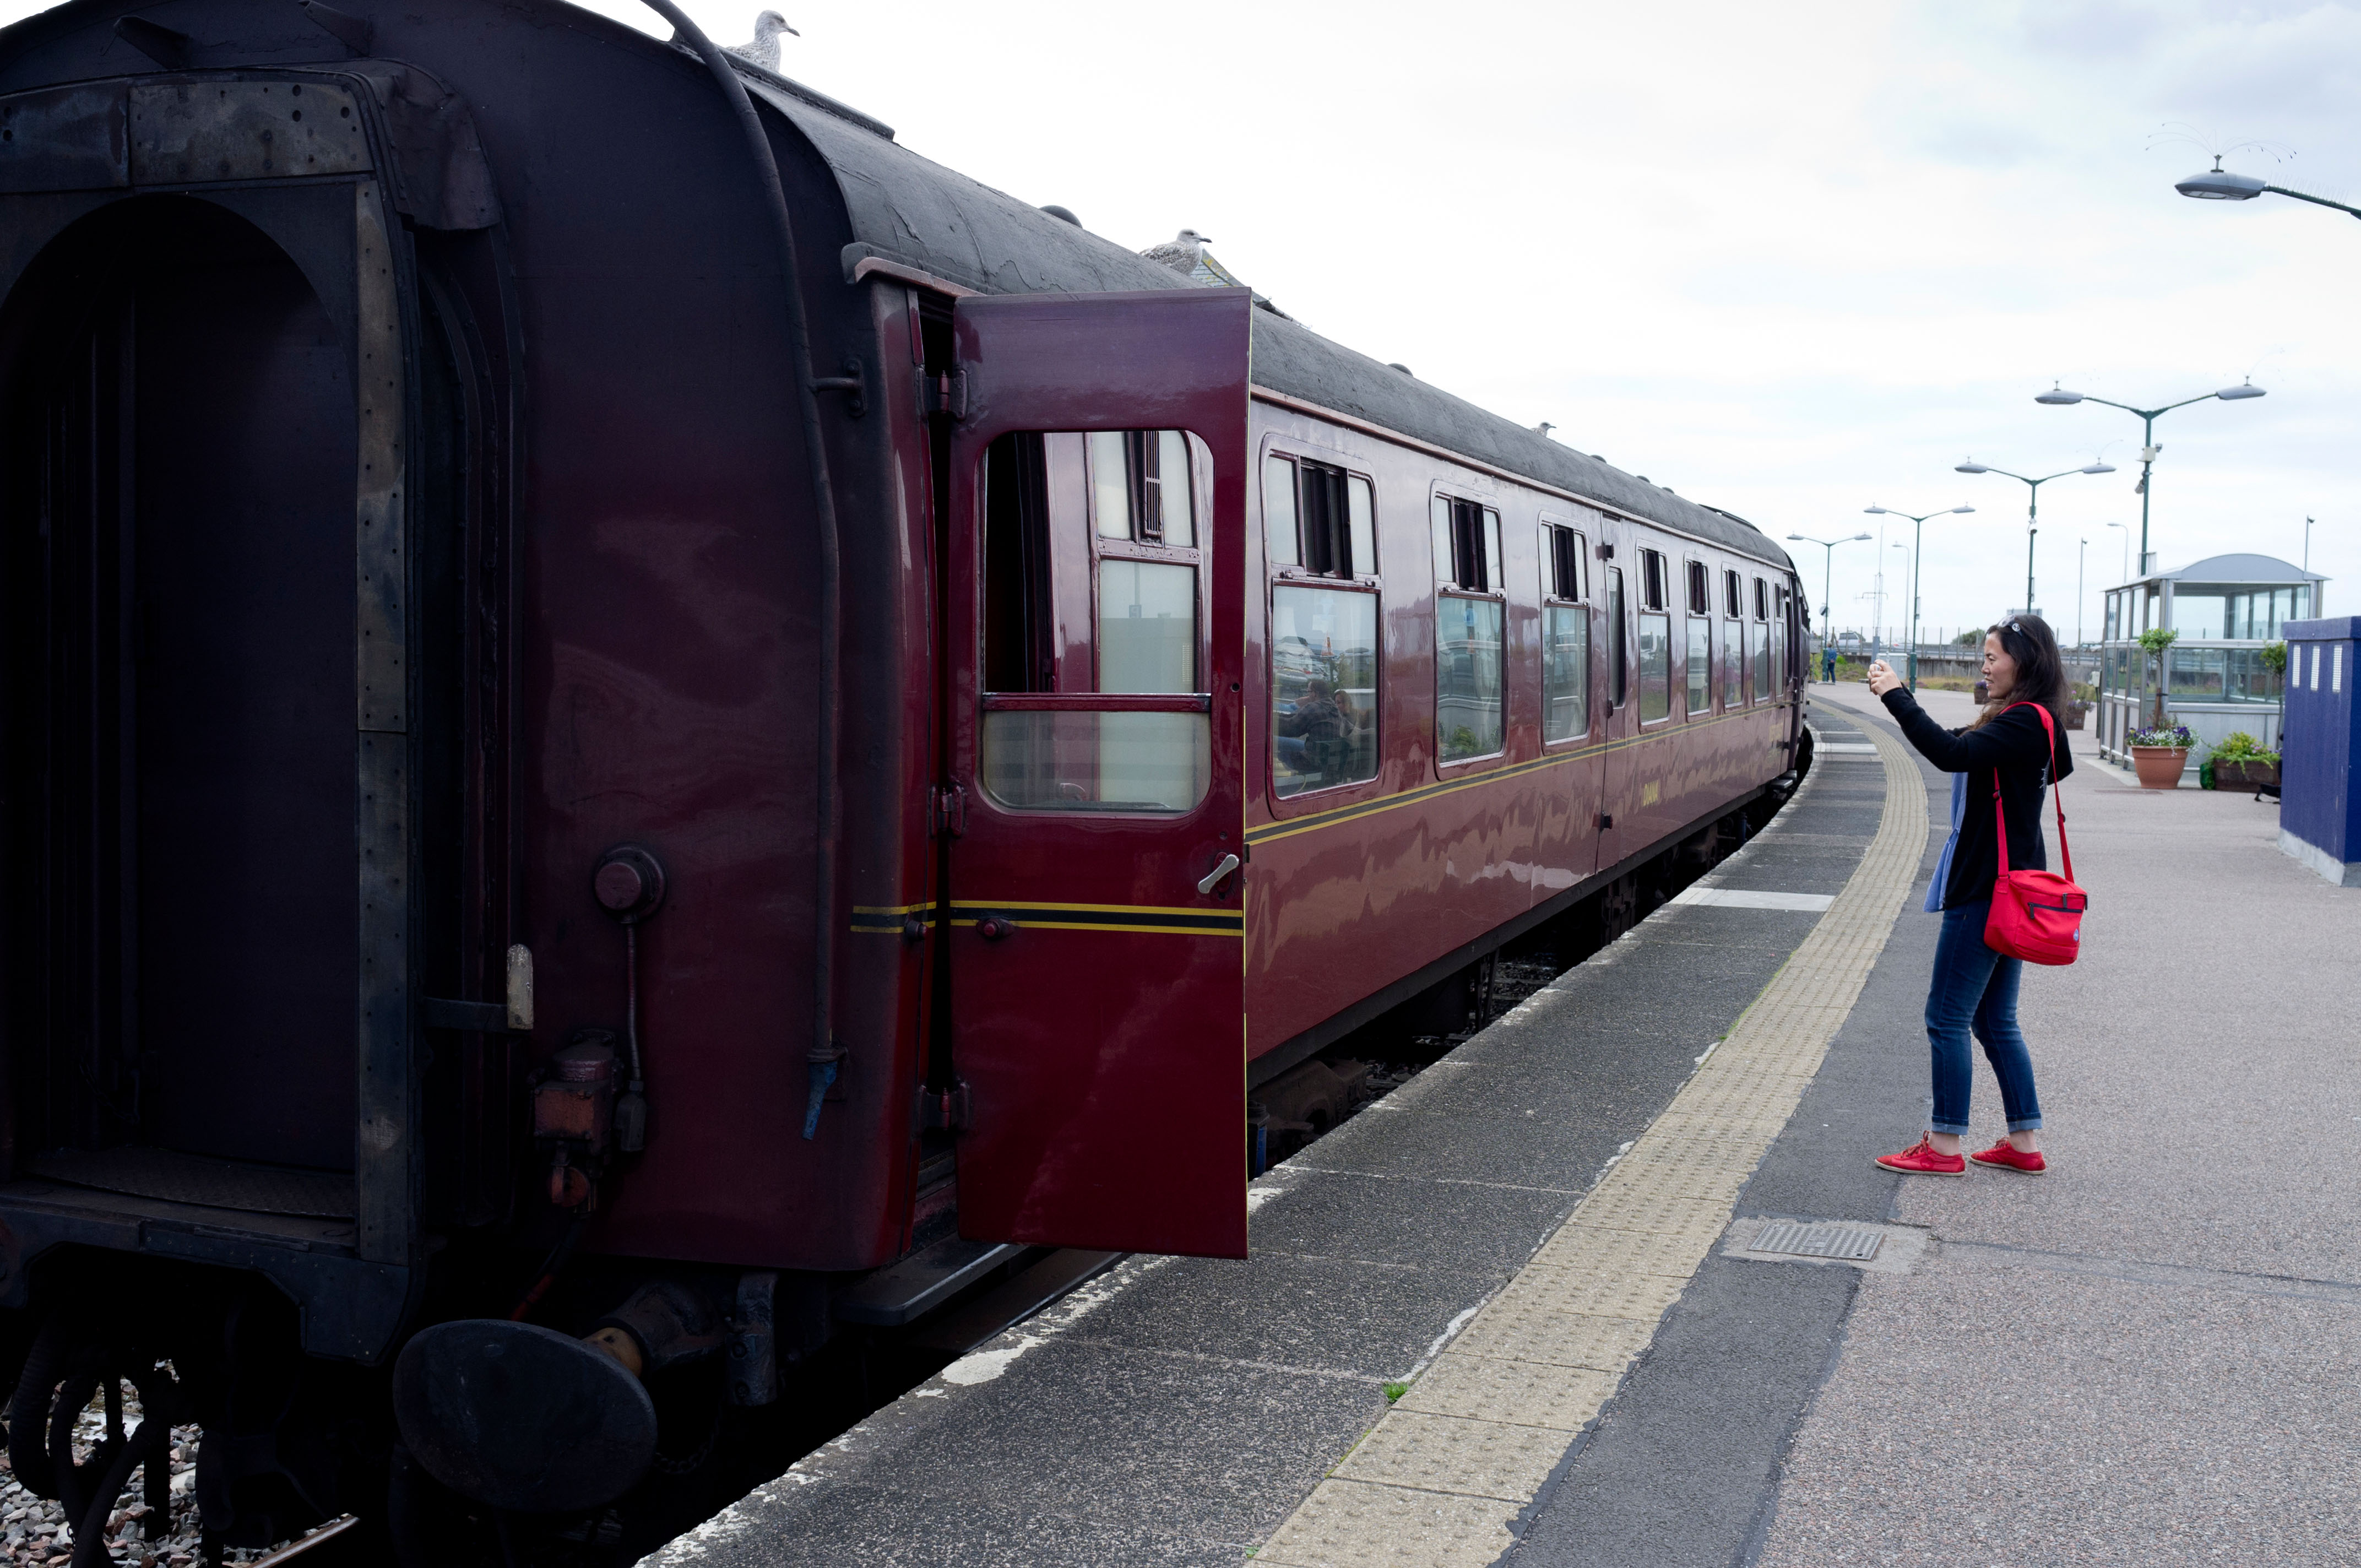 A Tourist taking a picture of the Jacobite steam train at Mallaig train station Scotland UK